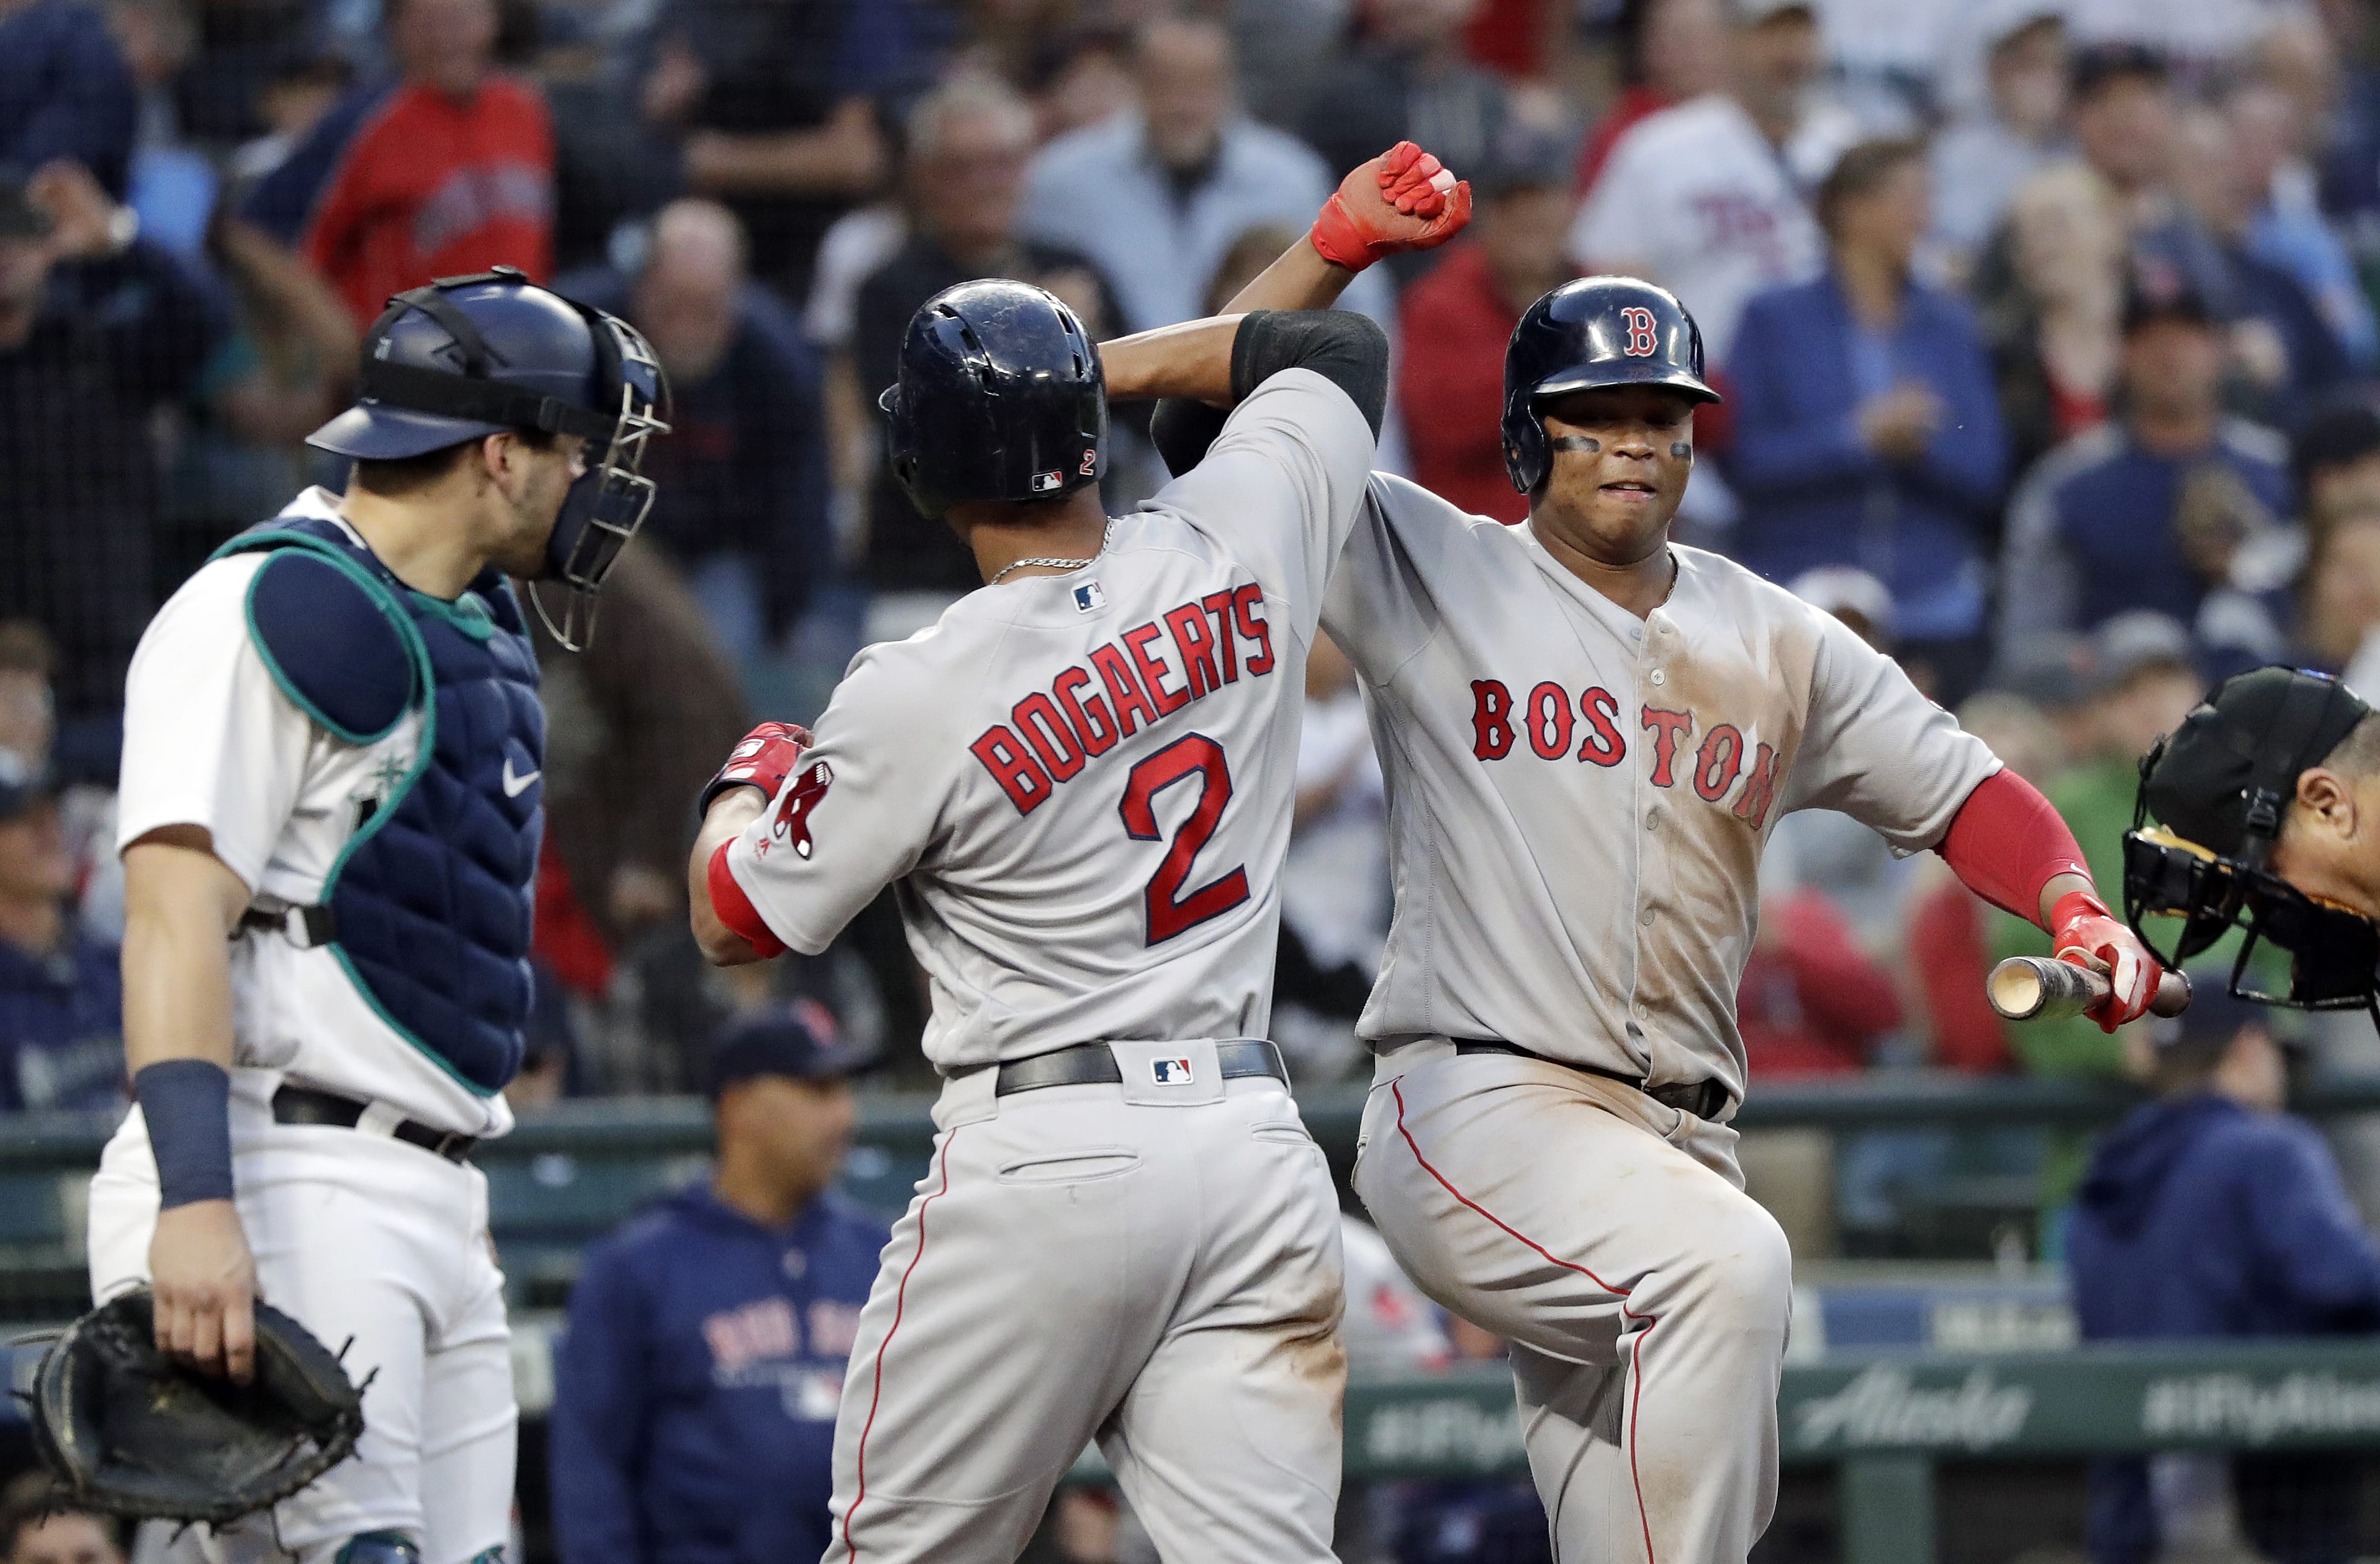 Boston Red Sox's Xander Bogaerts is congratulated after his solo